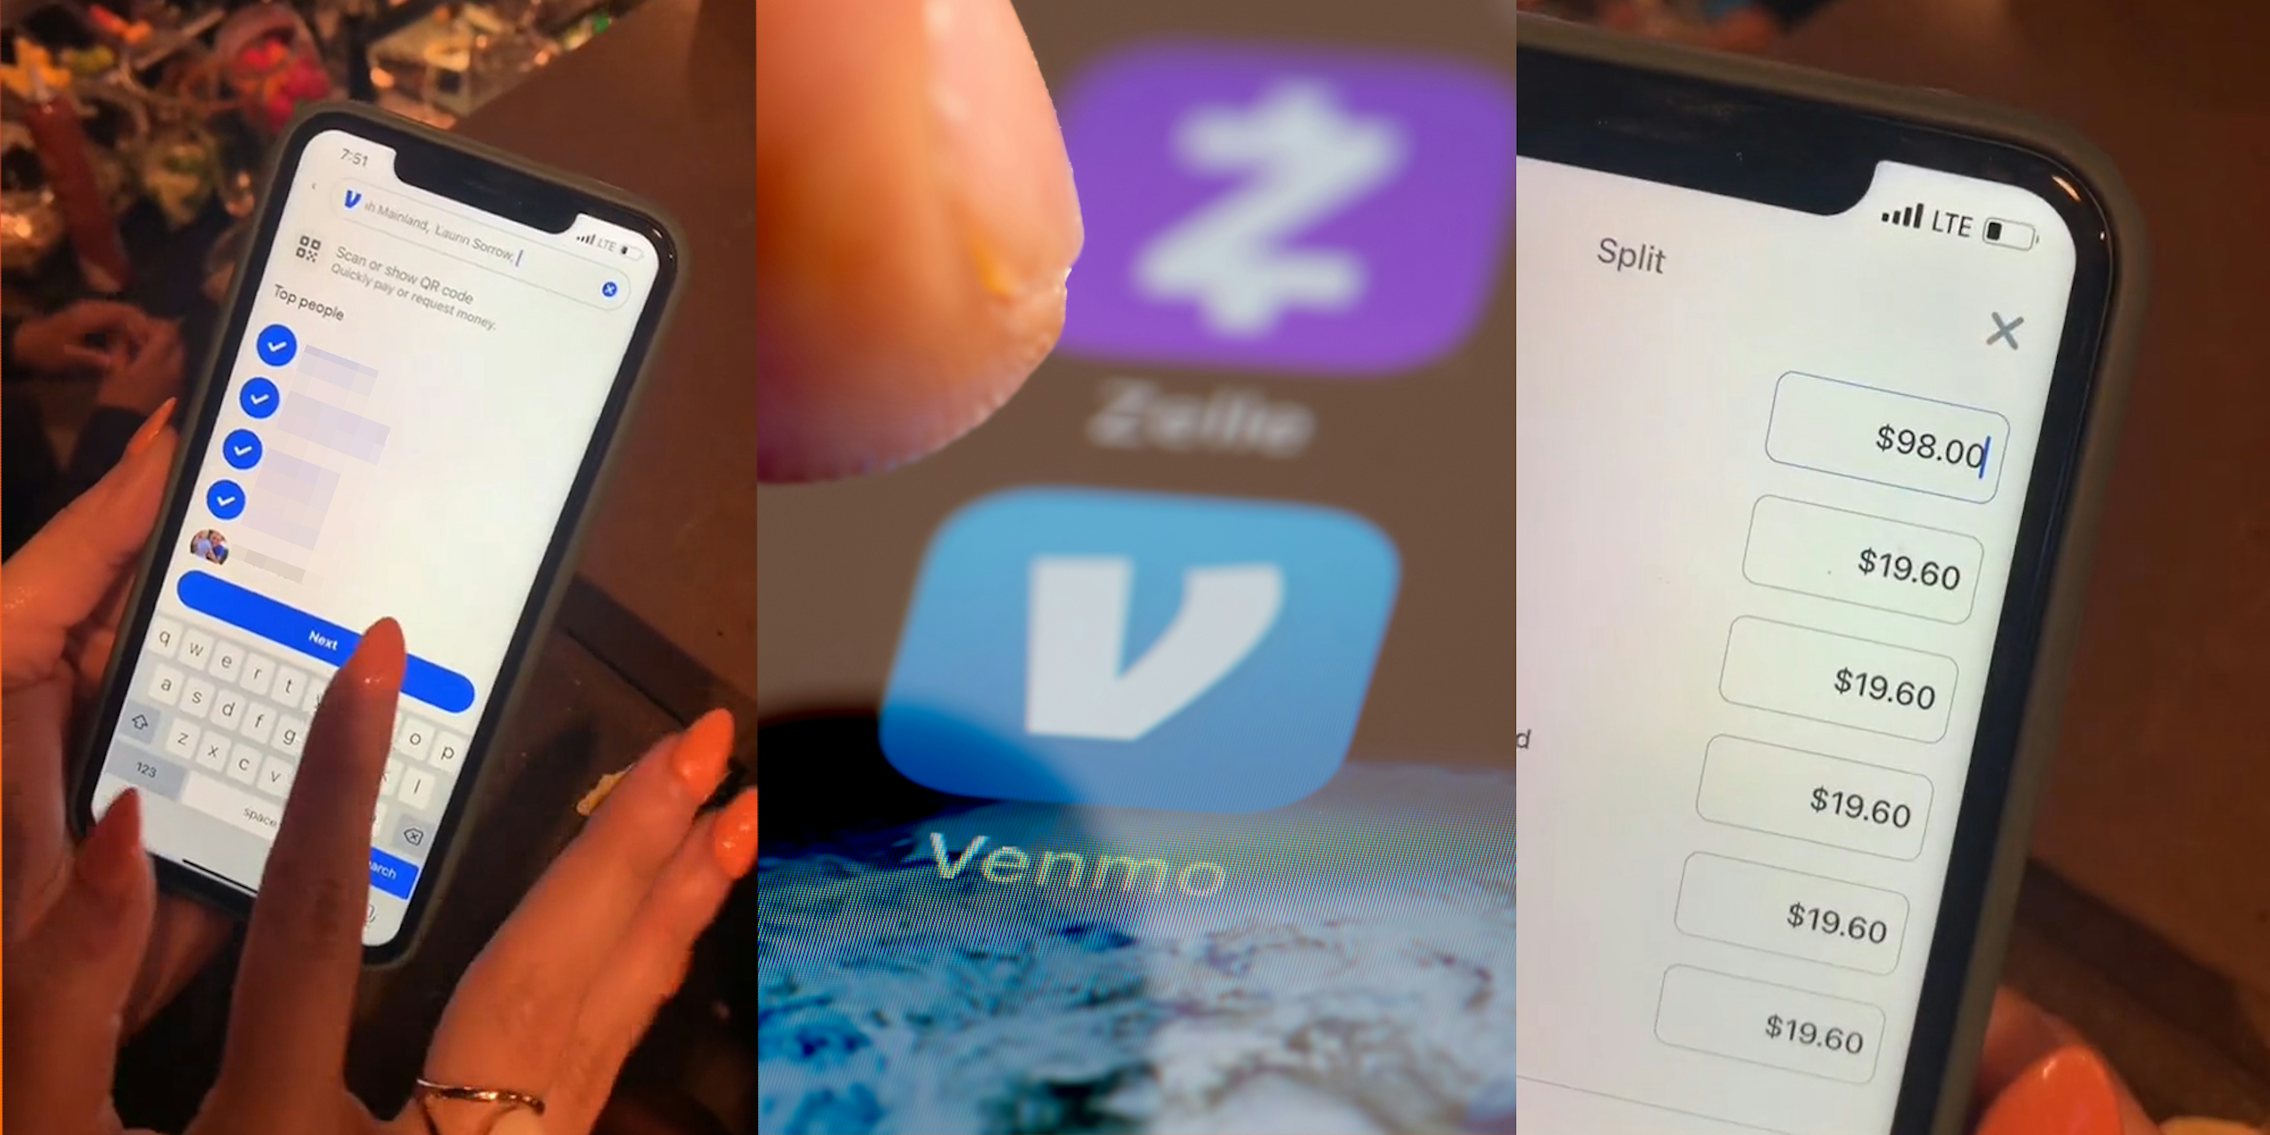 woman holding phone open on Venmo selecting people to split bill with (l) finger tapping Venmo app on phone screen (c) woman holding phone with $98.00 bill split evenly 5 ways (r)